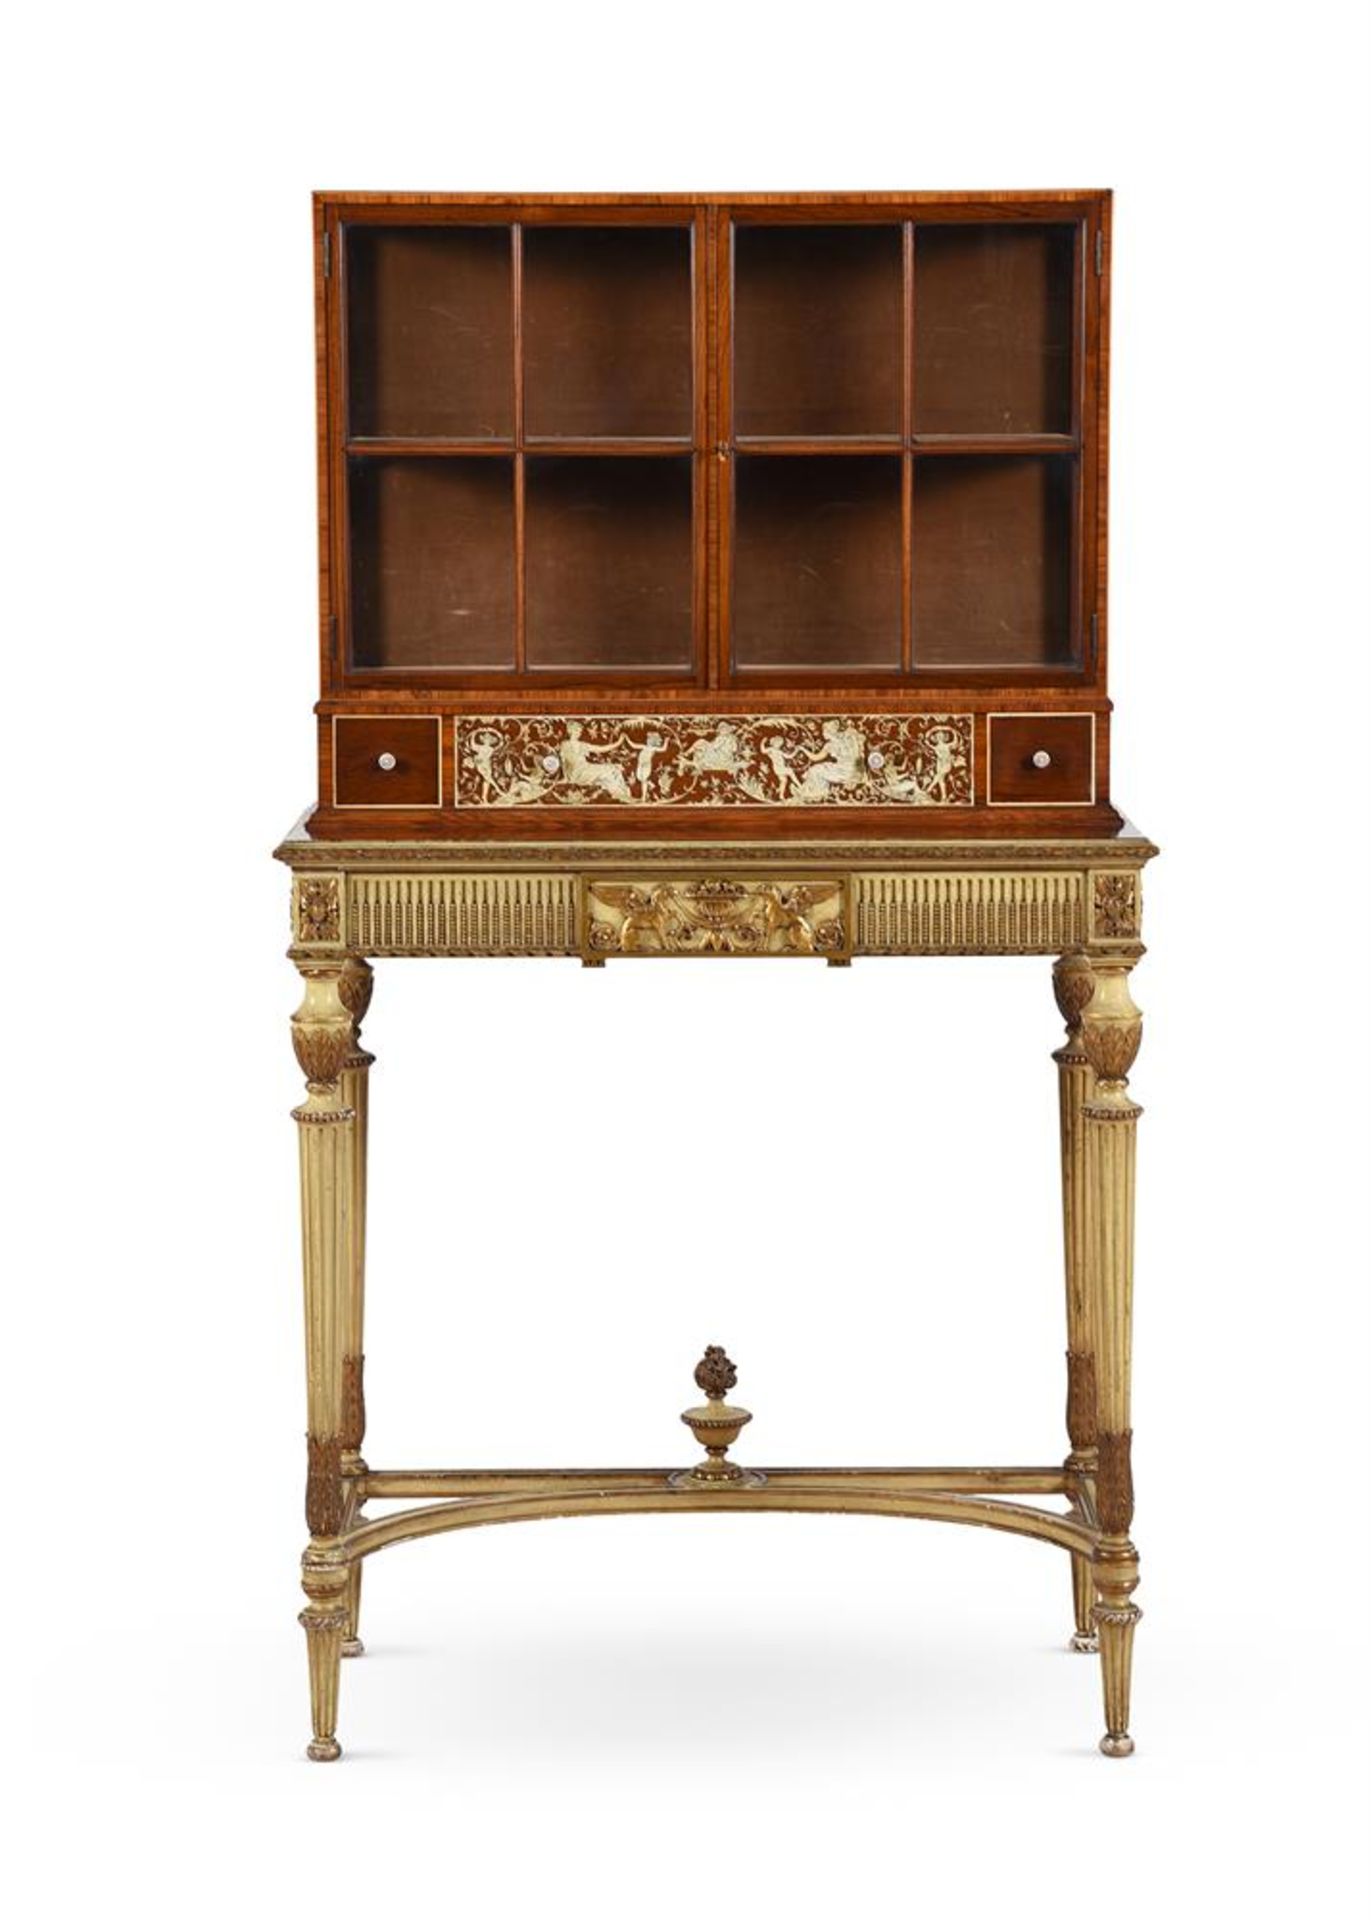 Y A ROSEWOOD AND IVORY MARQUETRY DECORATED SIDE CABINET, ATTRIBUTED TO COLLINSON & LOCK - Image 3 of 10